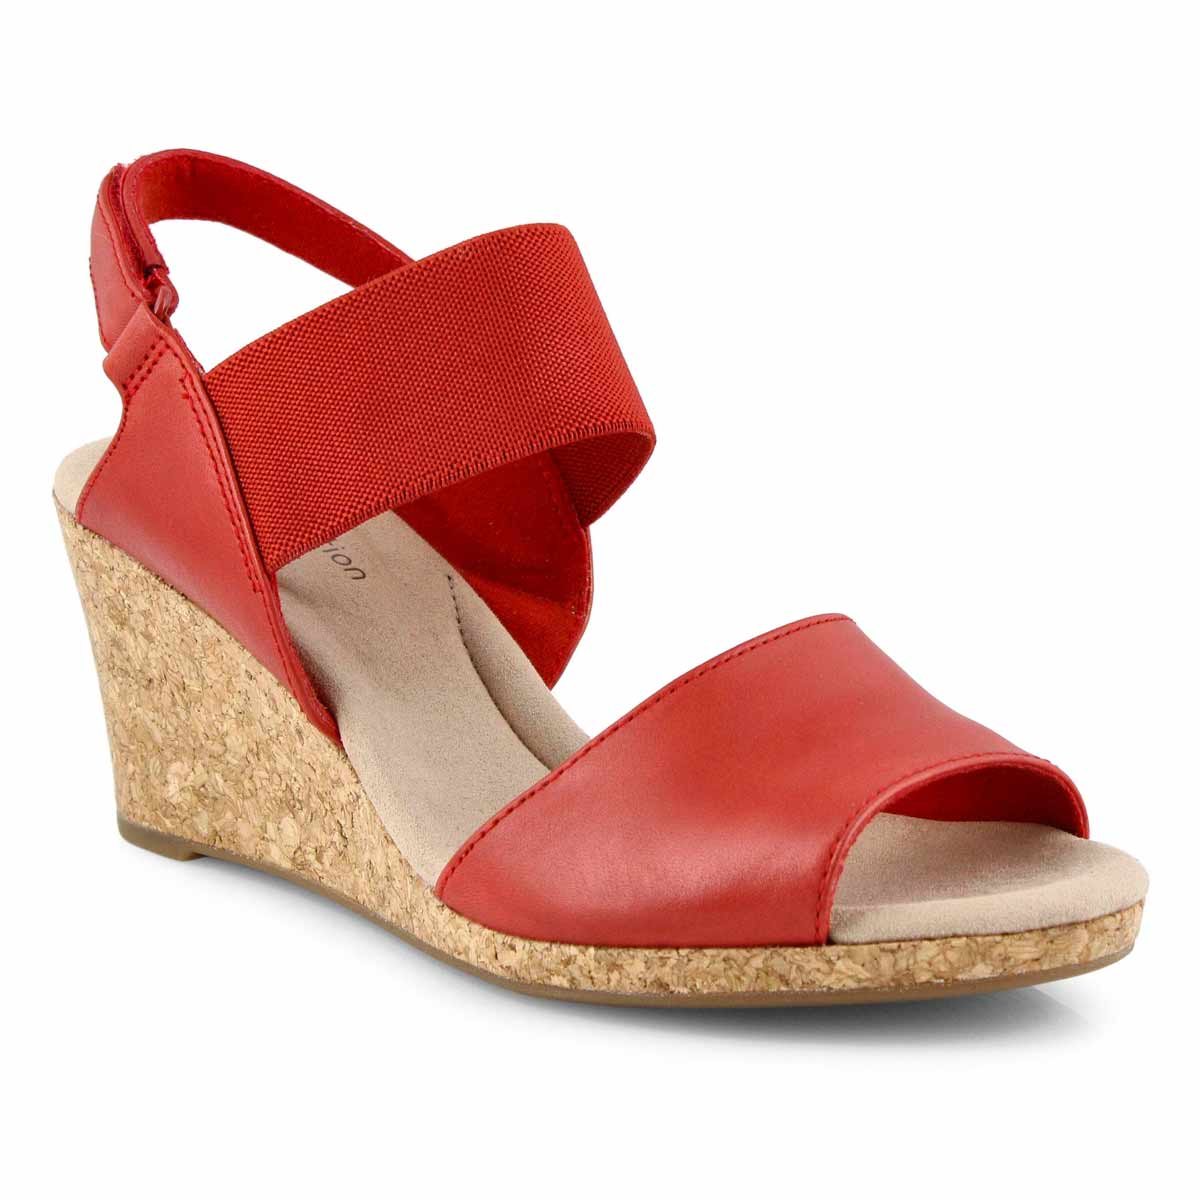 clarks red wedge sandals